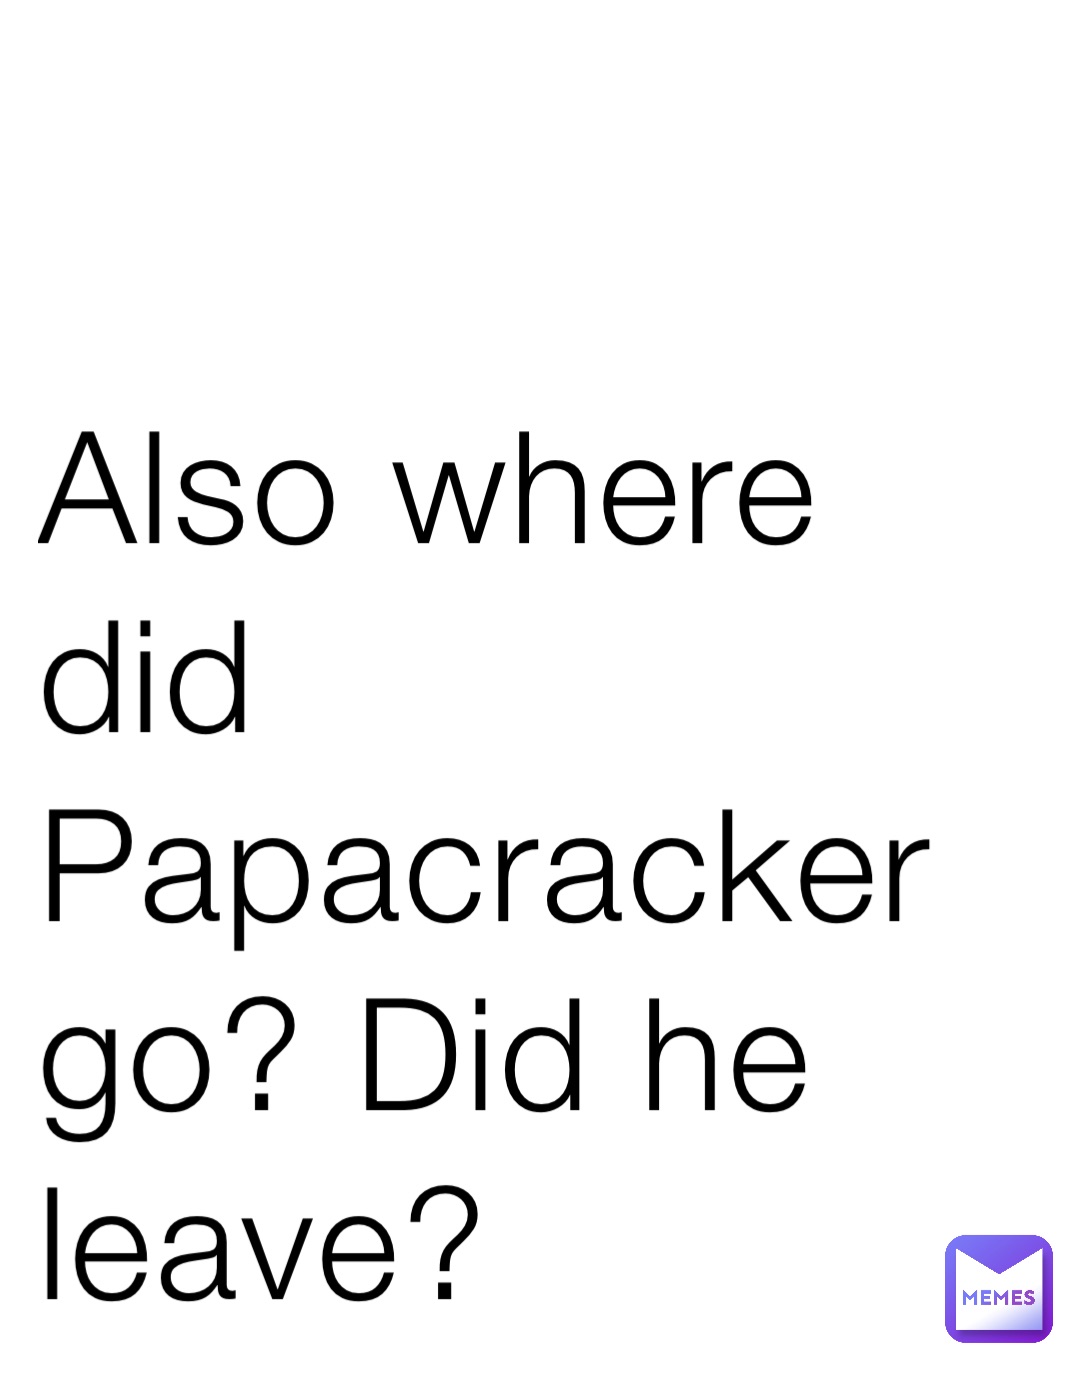 Also where did Papacracker go? Did he leave?